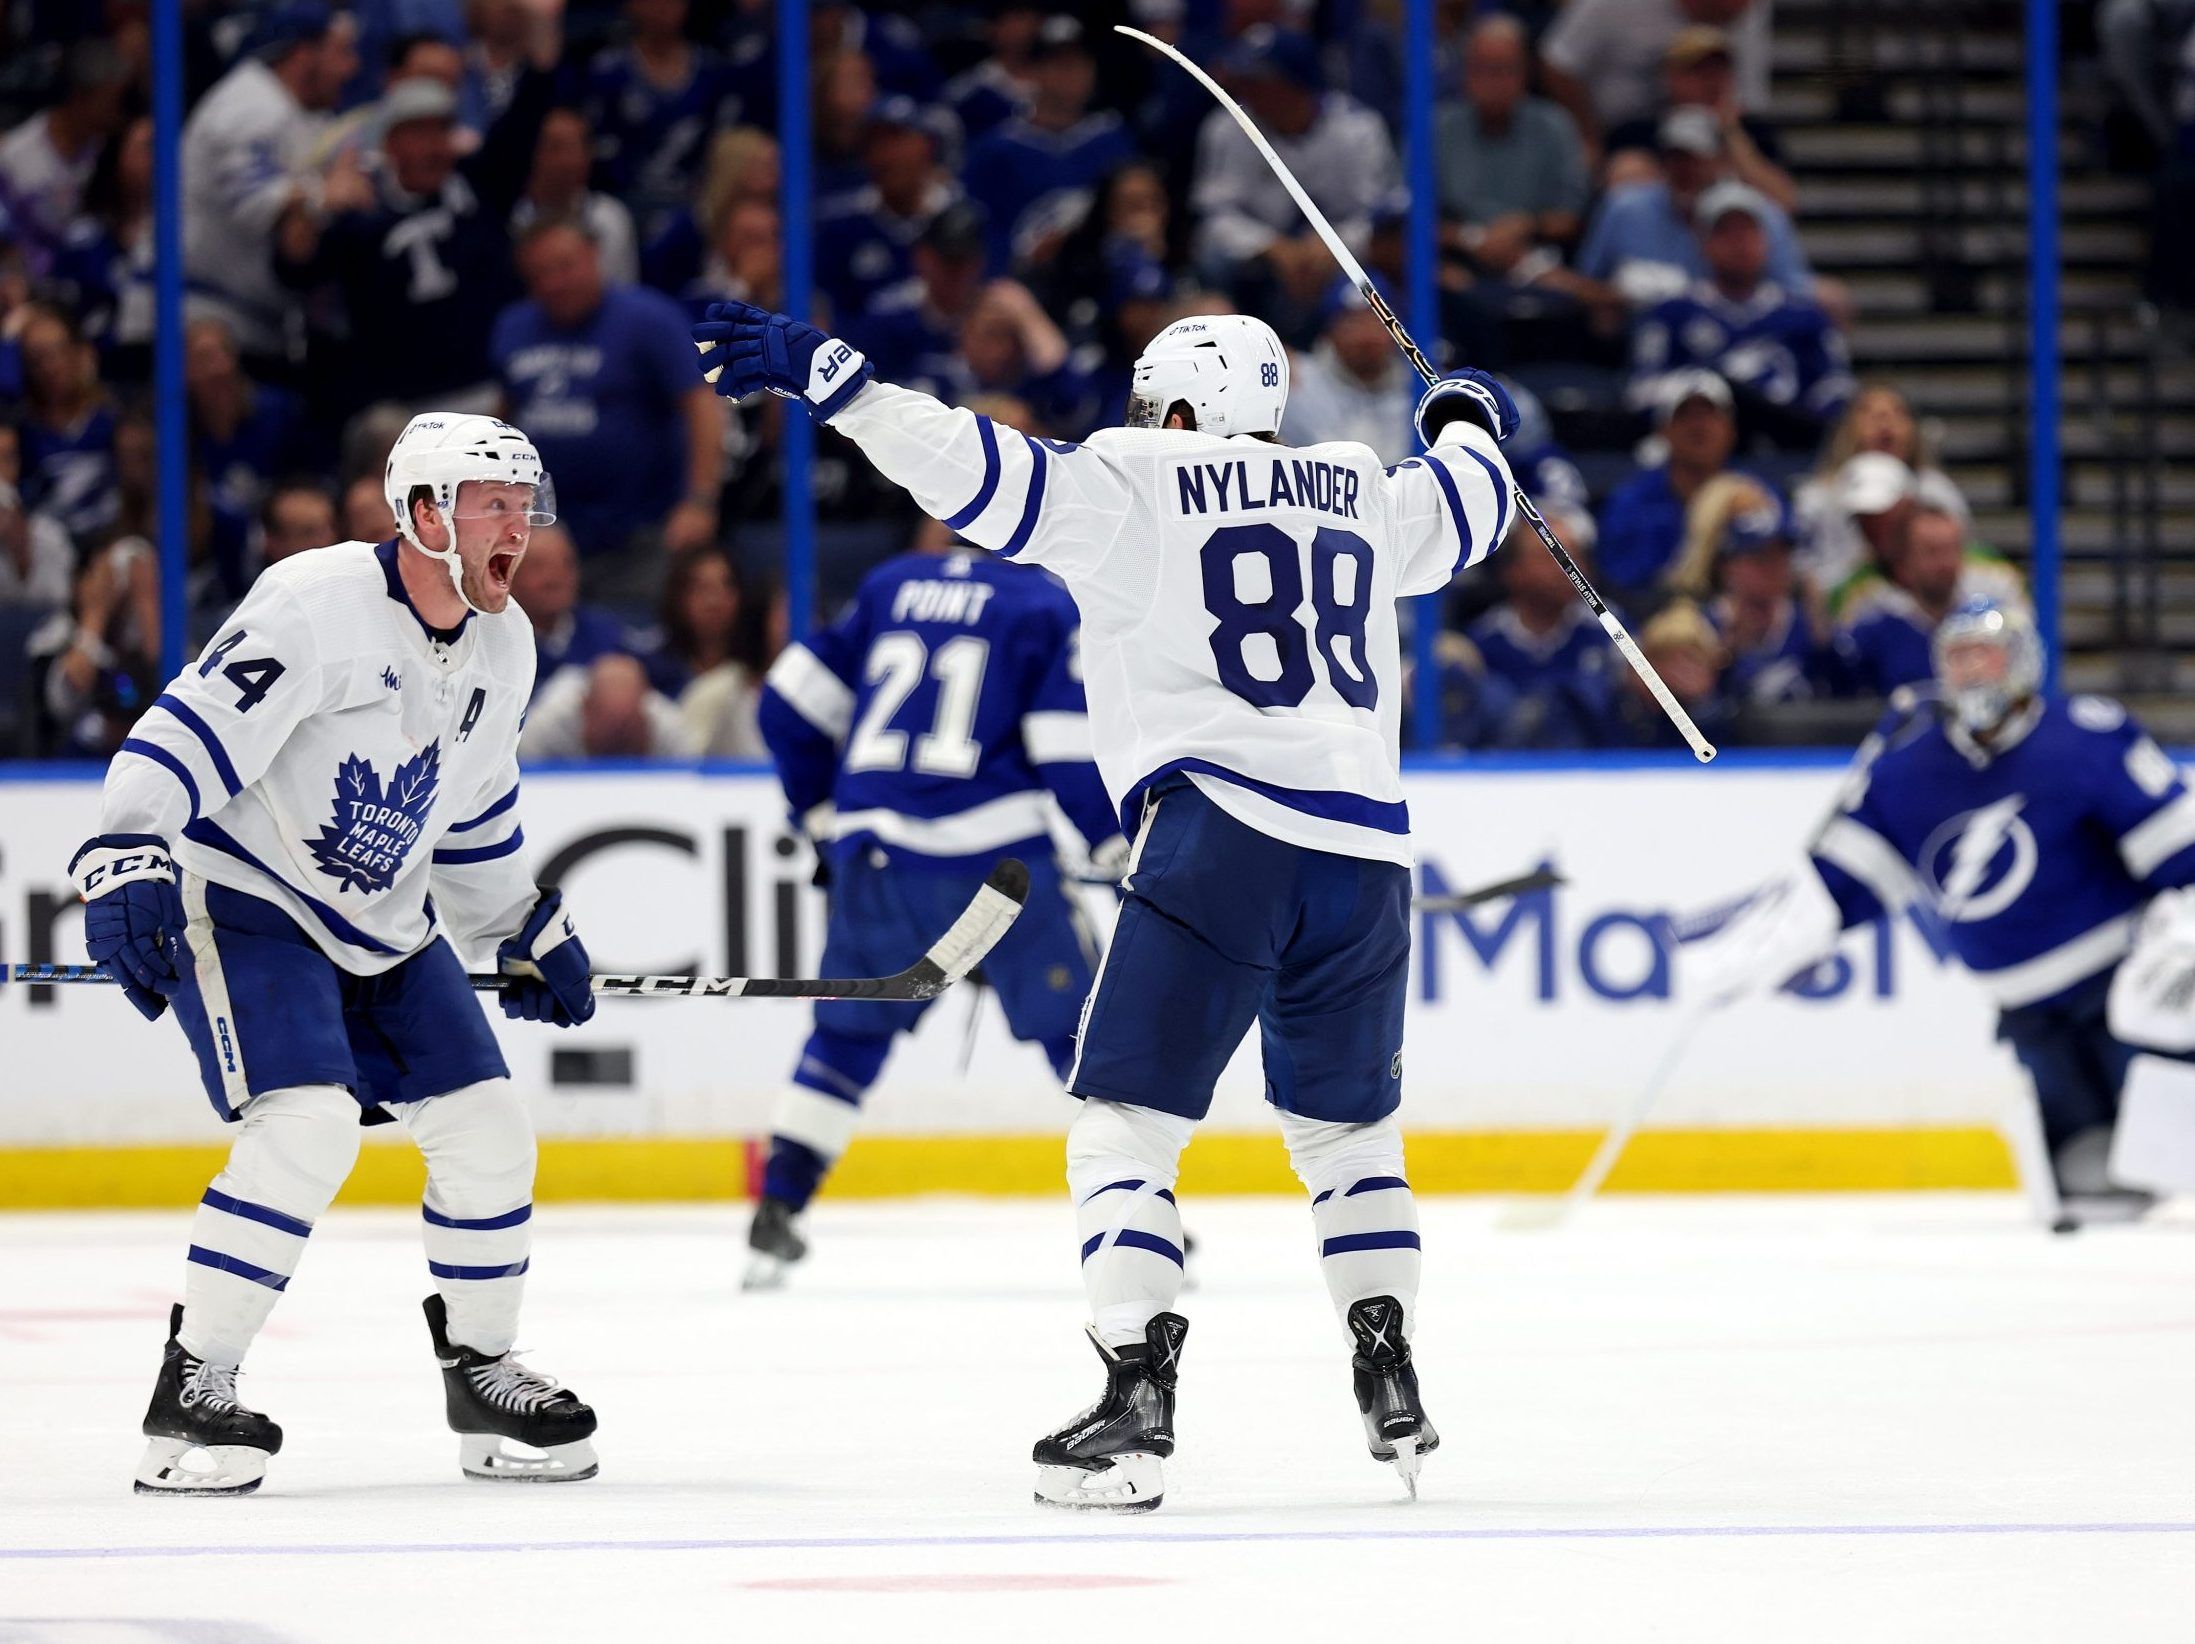 Toronto Maple Leafs are going all-in on skill and speed